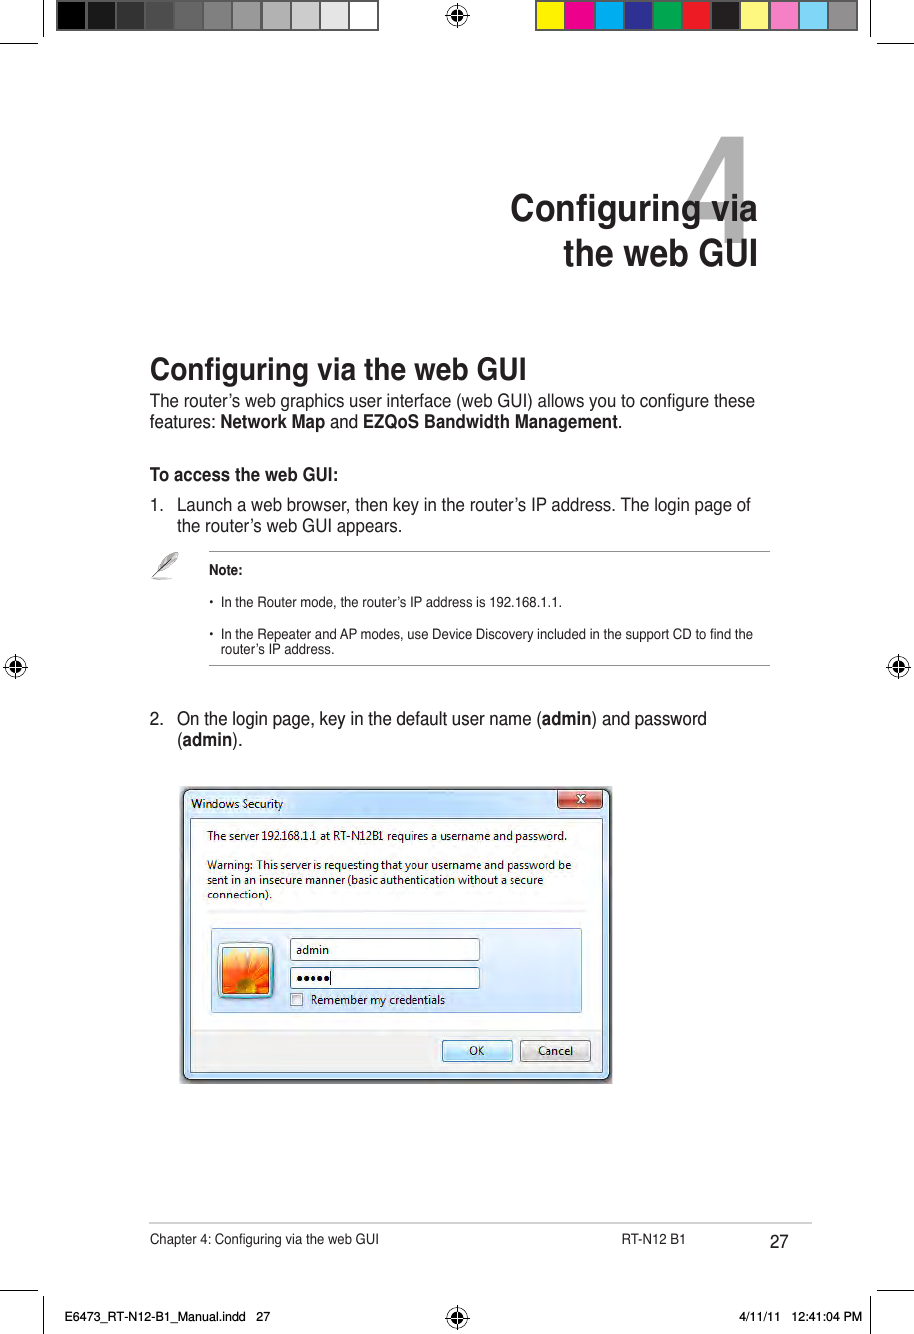 27Chapter 4: Conguring via the web GUI                  RT-N12 B14Conguring via  the web GUIConguring via the web GUIThe router’s web graphics user interface (web GUI) allows you to congure these features: Network Map and EZQoS Bandwidth Management.To access the web GUI:1.  Launch a web browser, then key in the router’s IP address. The login page of the router’s web GUI appears.2.  On the login page, key in the default user name (admin) and password (admin).Note:•  In the Router mode, the router’s IP address is 192.168.1.1.•  In the Repeater and AP modes, use Device Discovery included in the support CD to nd the    router’s IP address.E6473_RT-N12-B1_Manual.indd   27 4/11/11   12:41:04 PM